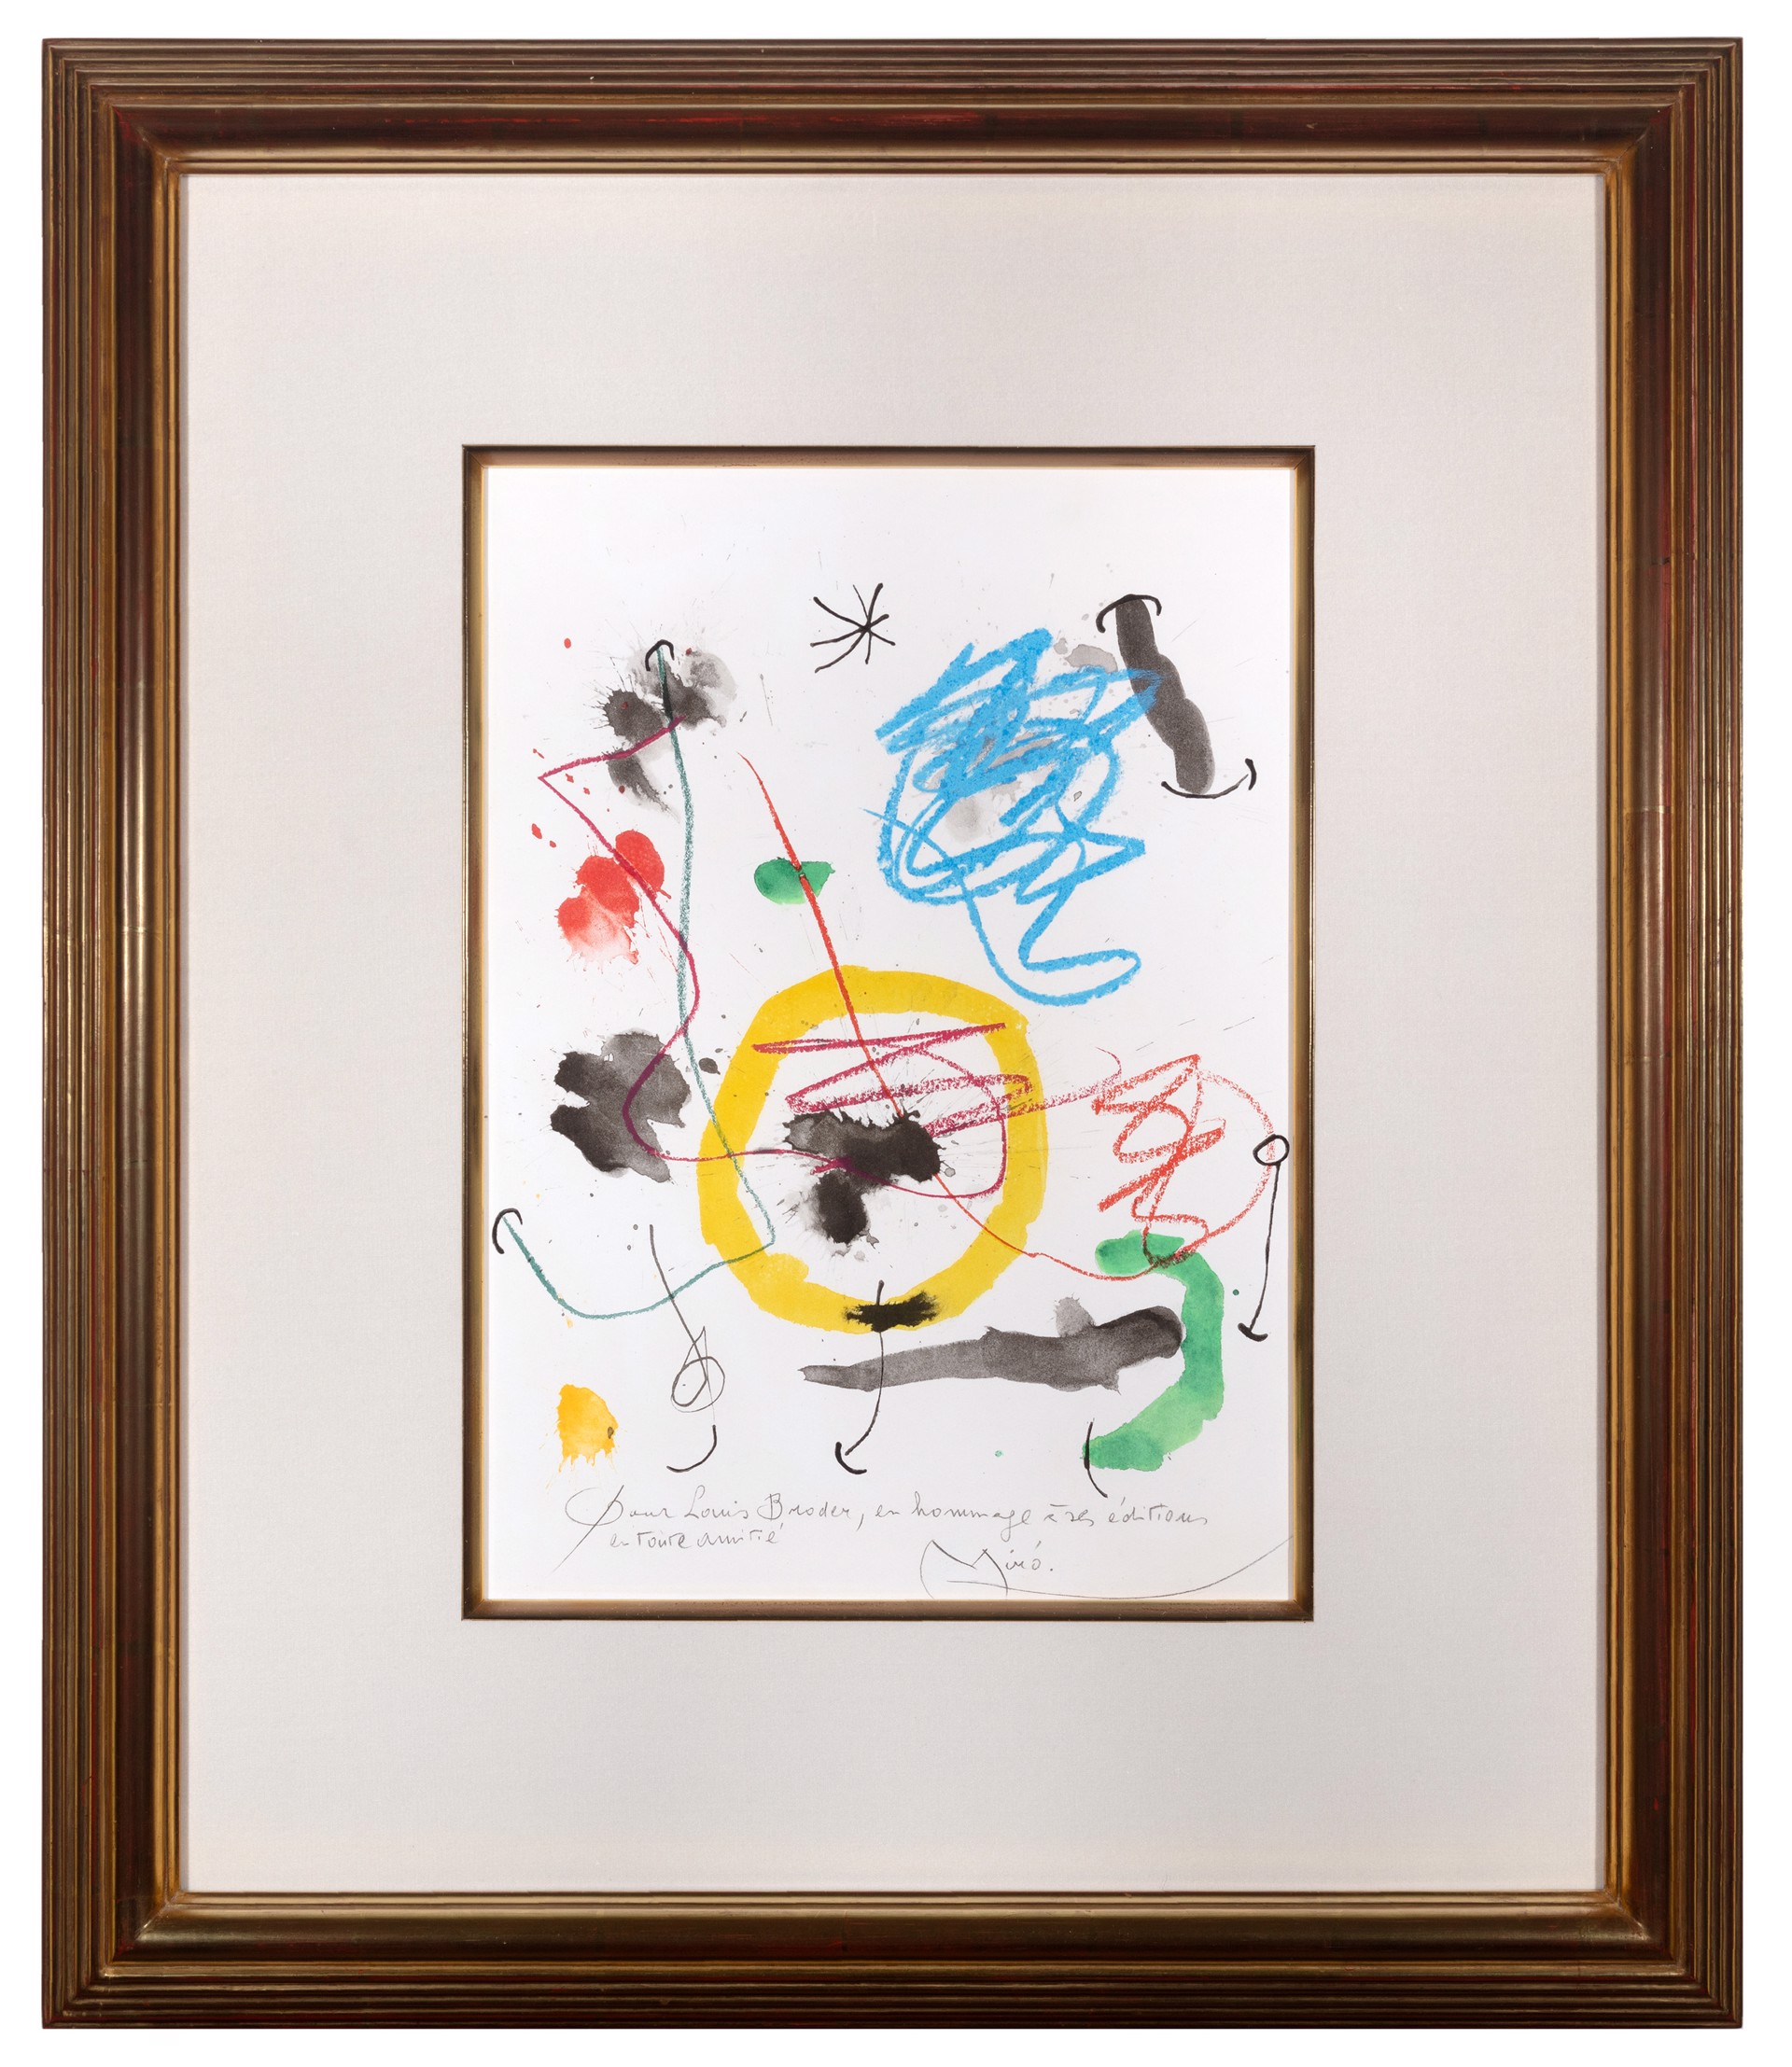 Untitled (For Louis Broder... In all friendship, Miro) by Joan Miró